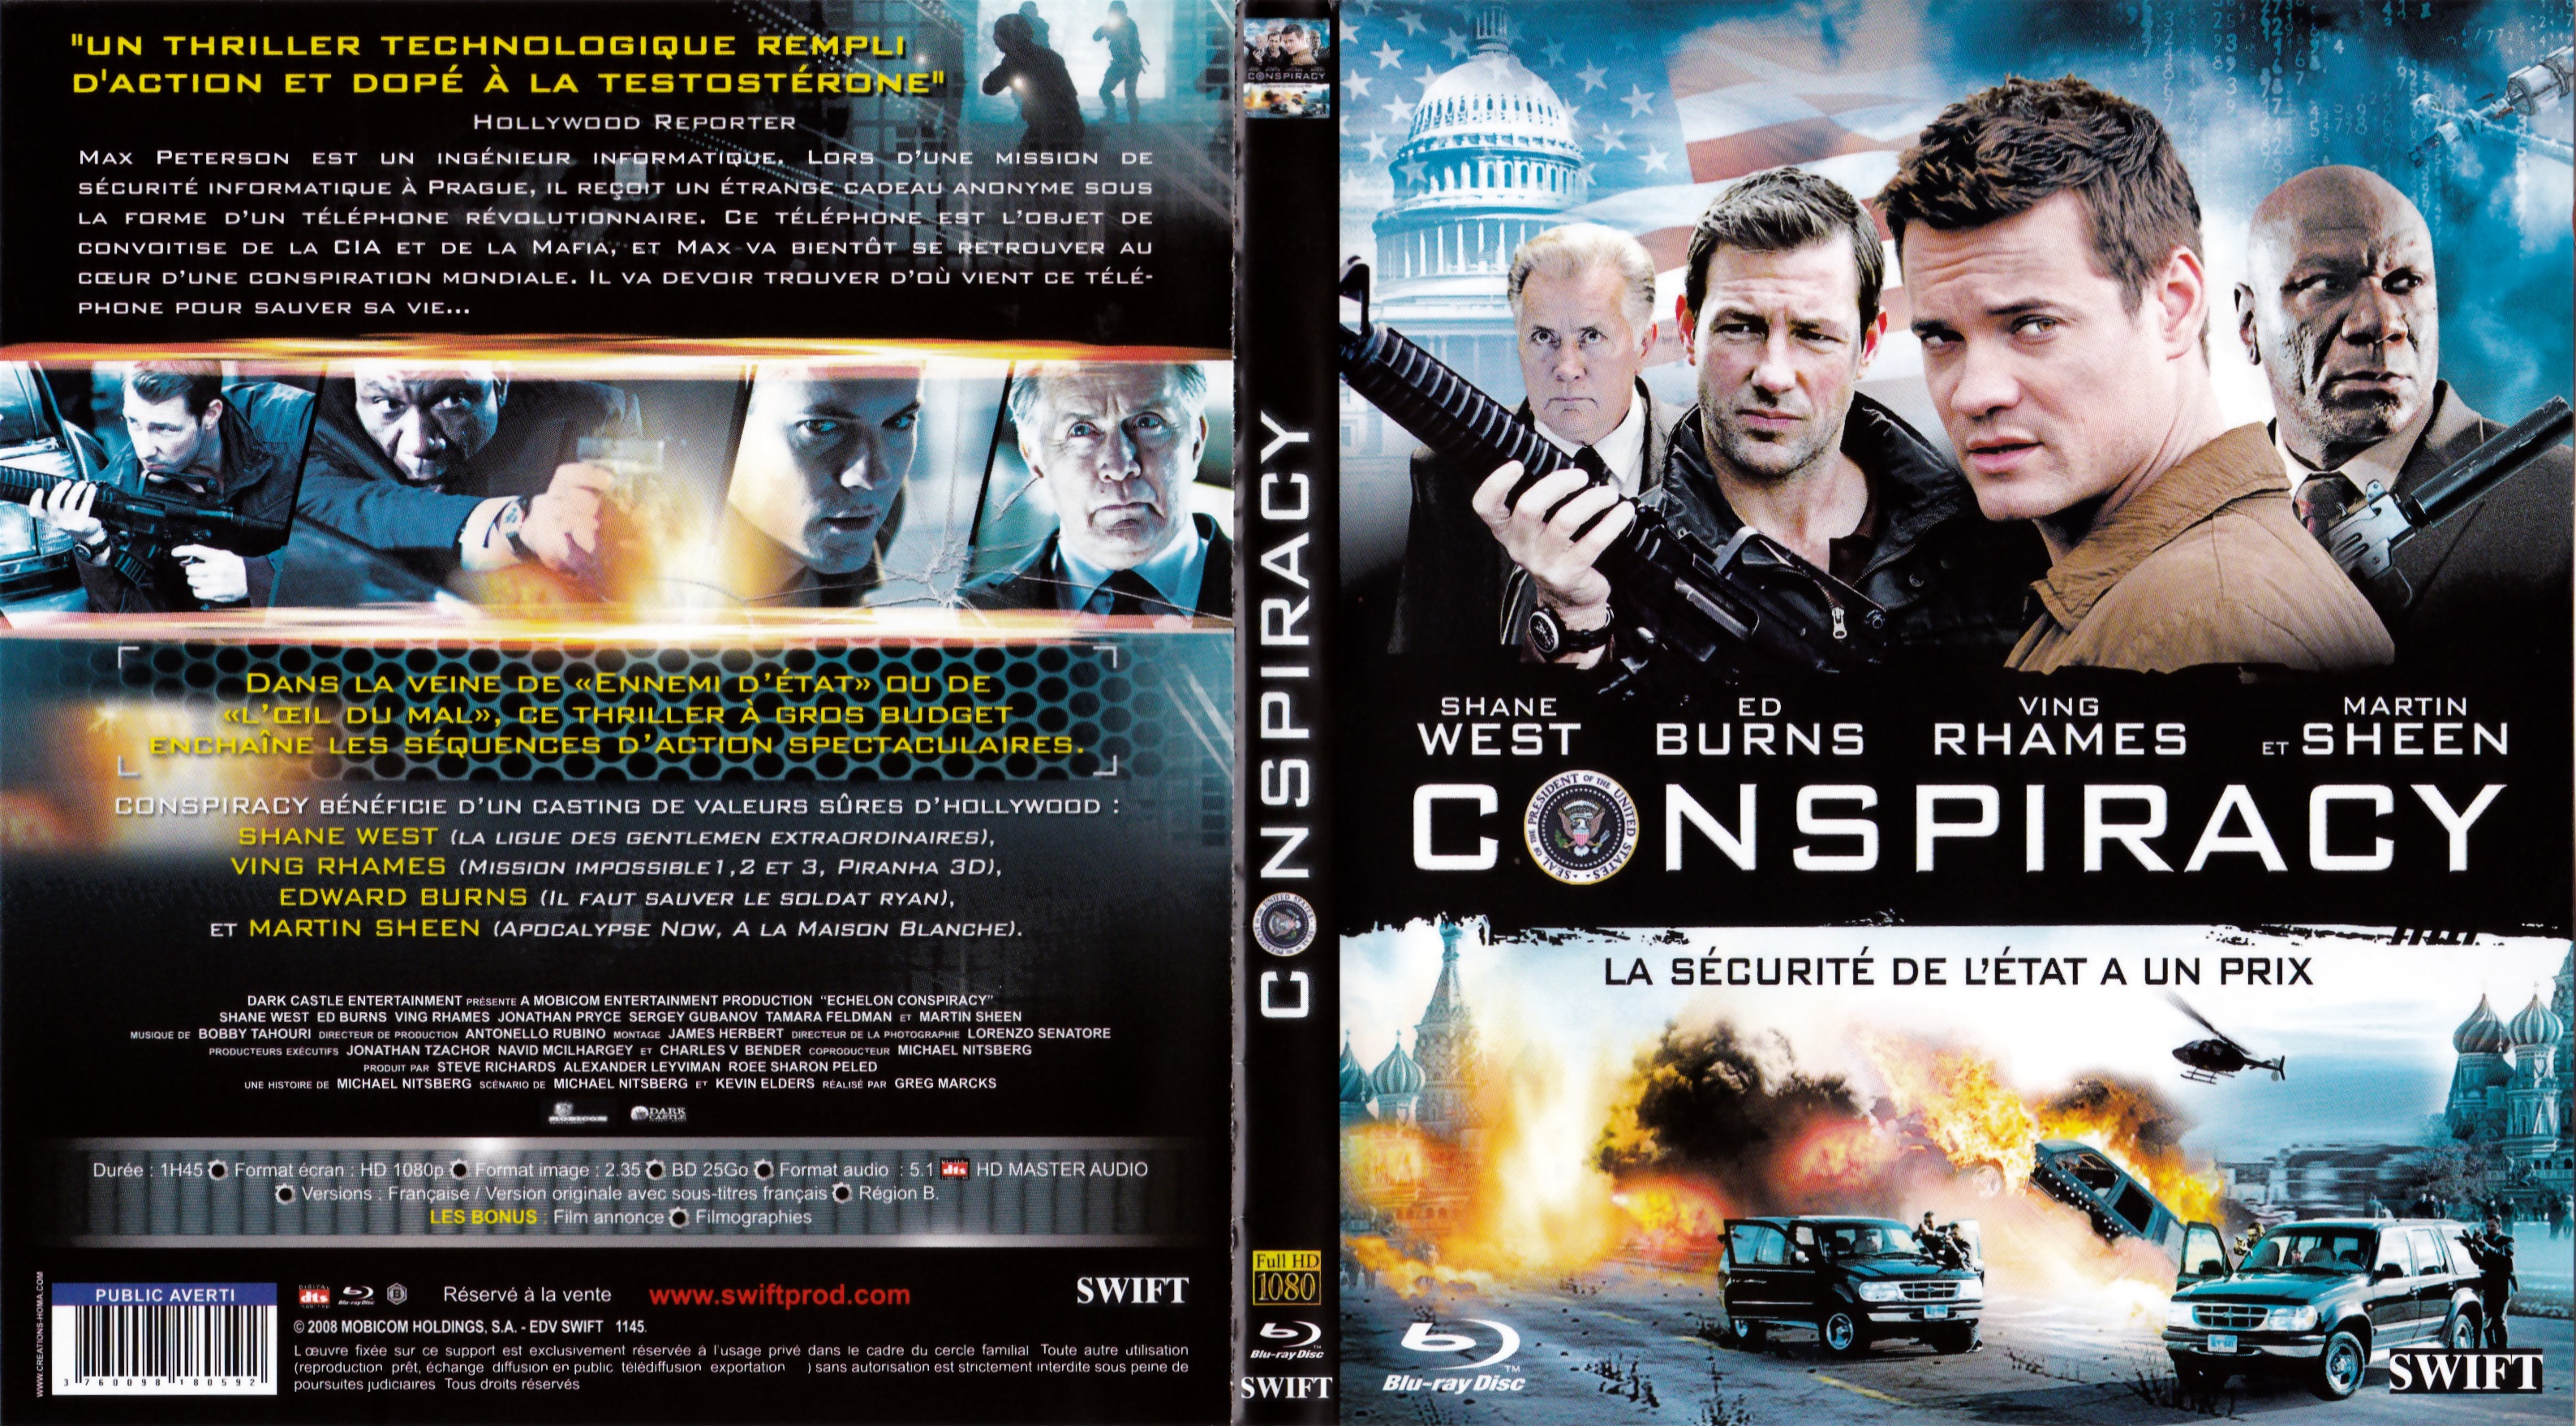 Jaquette DVD Conspiracy 2008 (BLU-RAY)